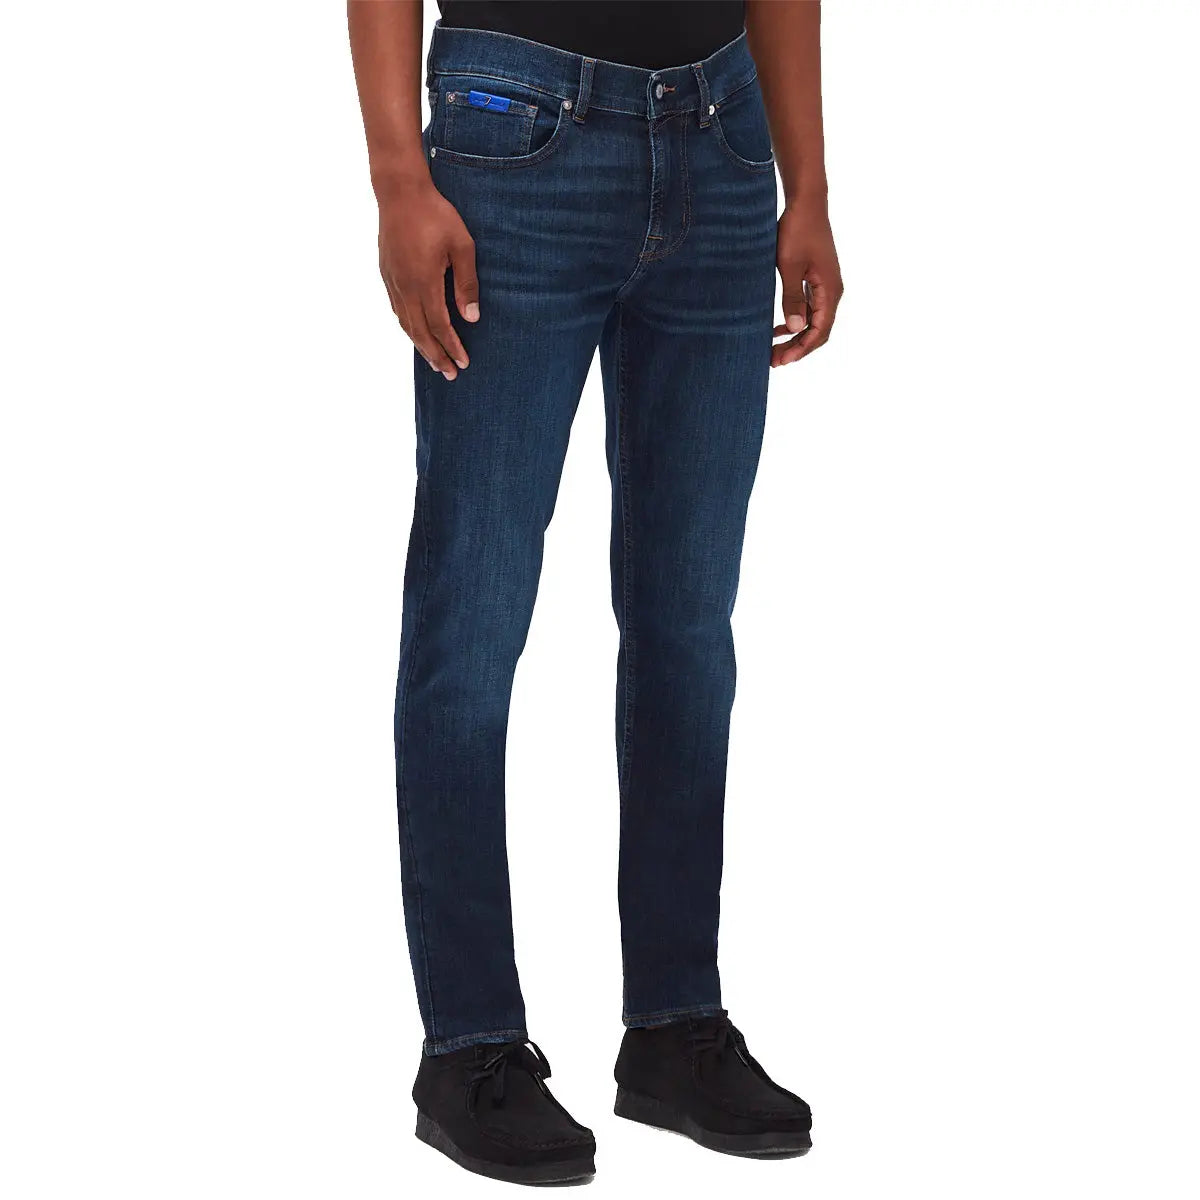 Blue Special Edition Slimmy Tapered Jeans  7 For All Mankind   